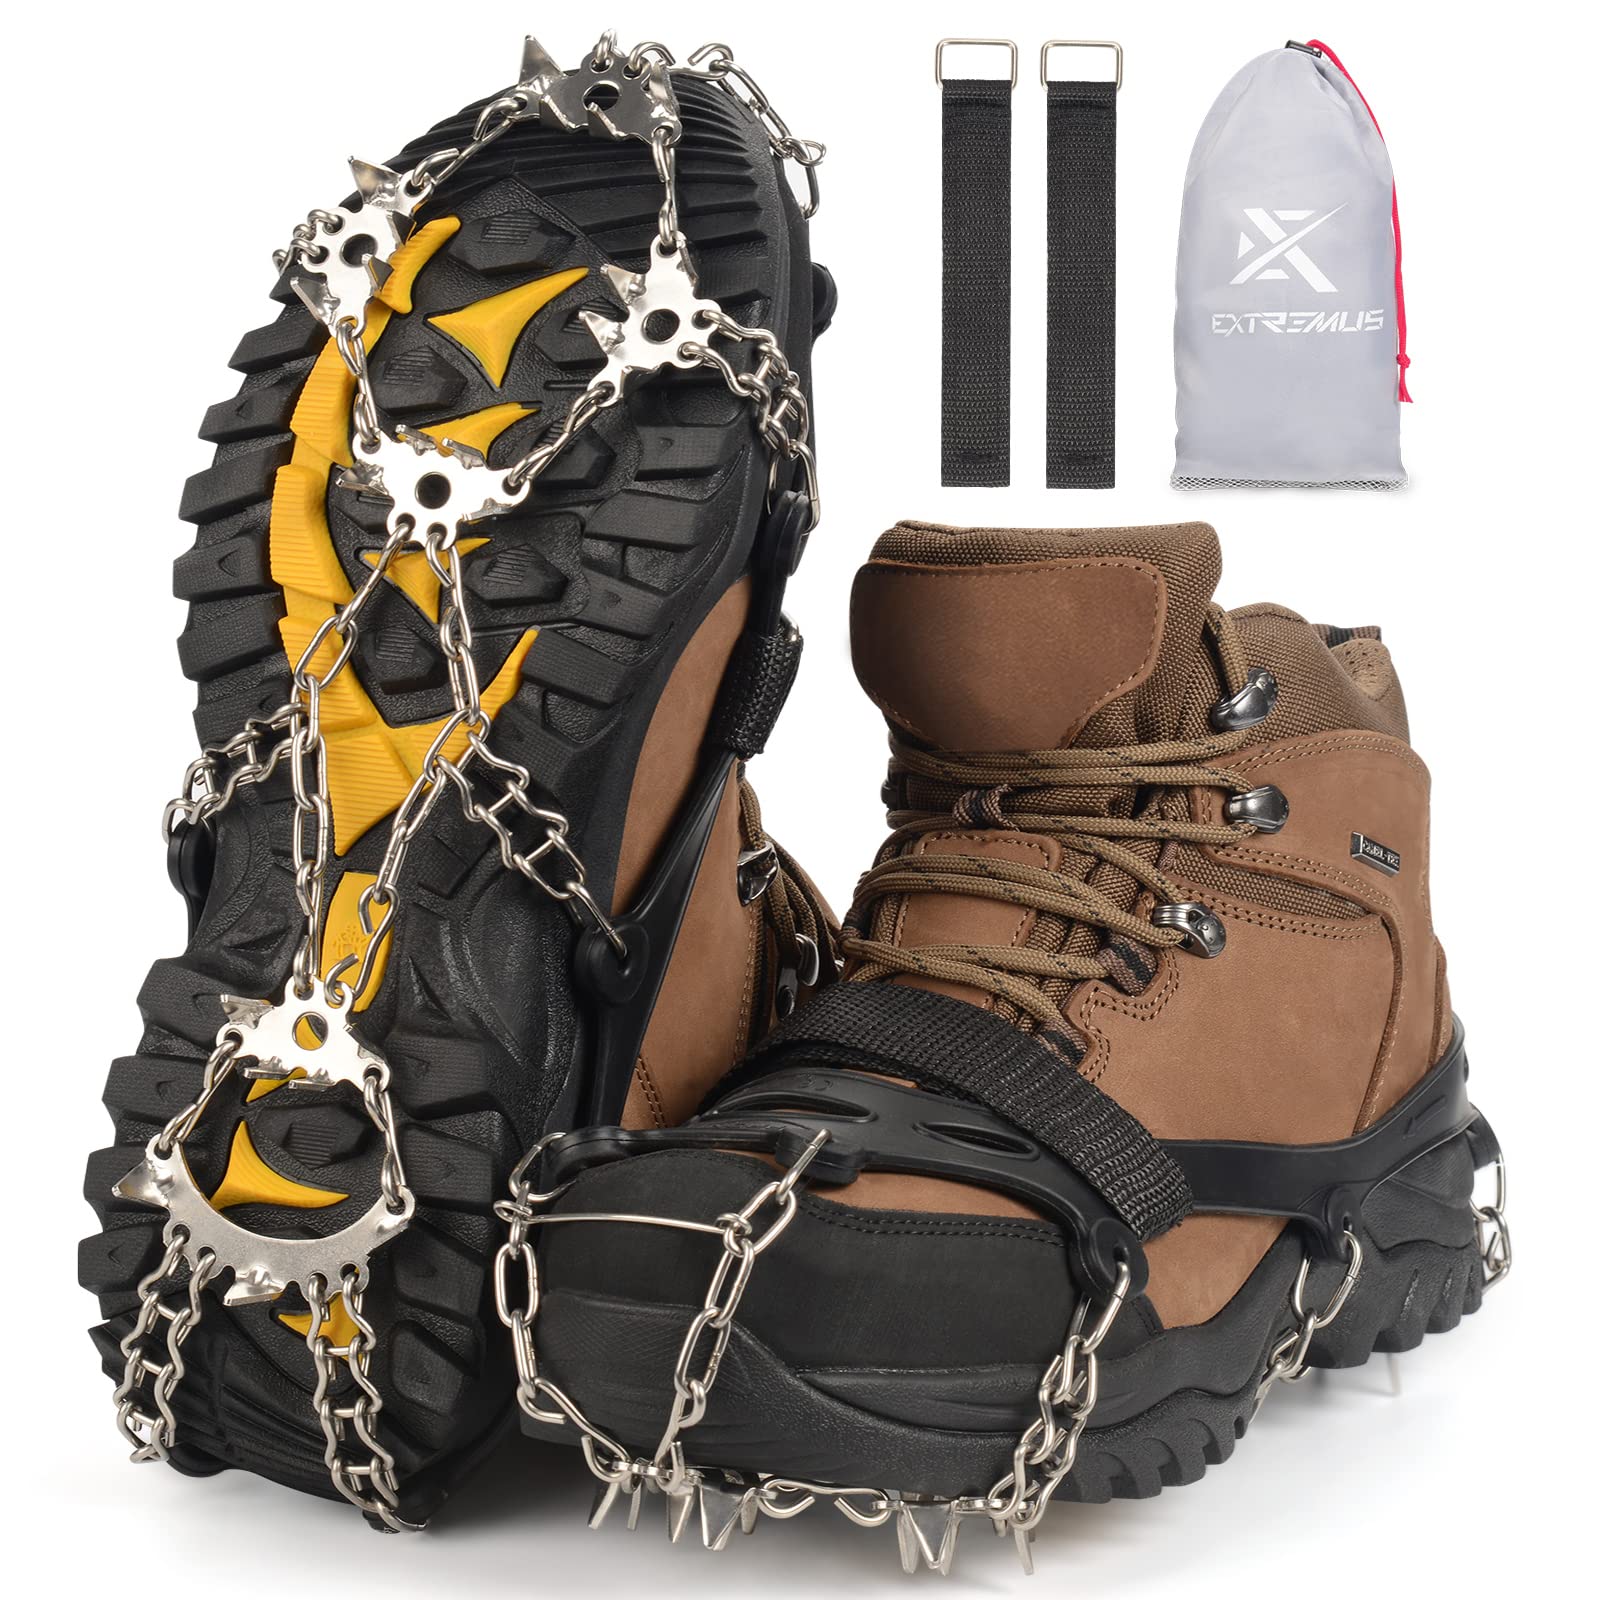 Extremus 23-Spike Ice Cleats, Crampons for Men or Women, Abrasion